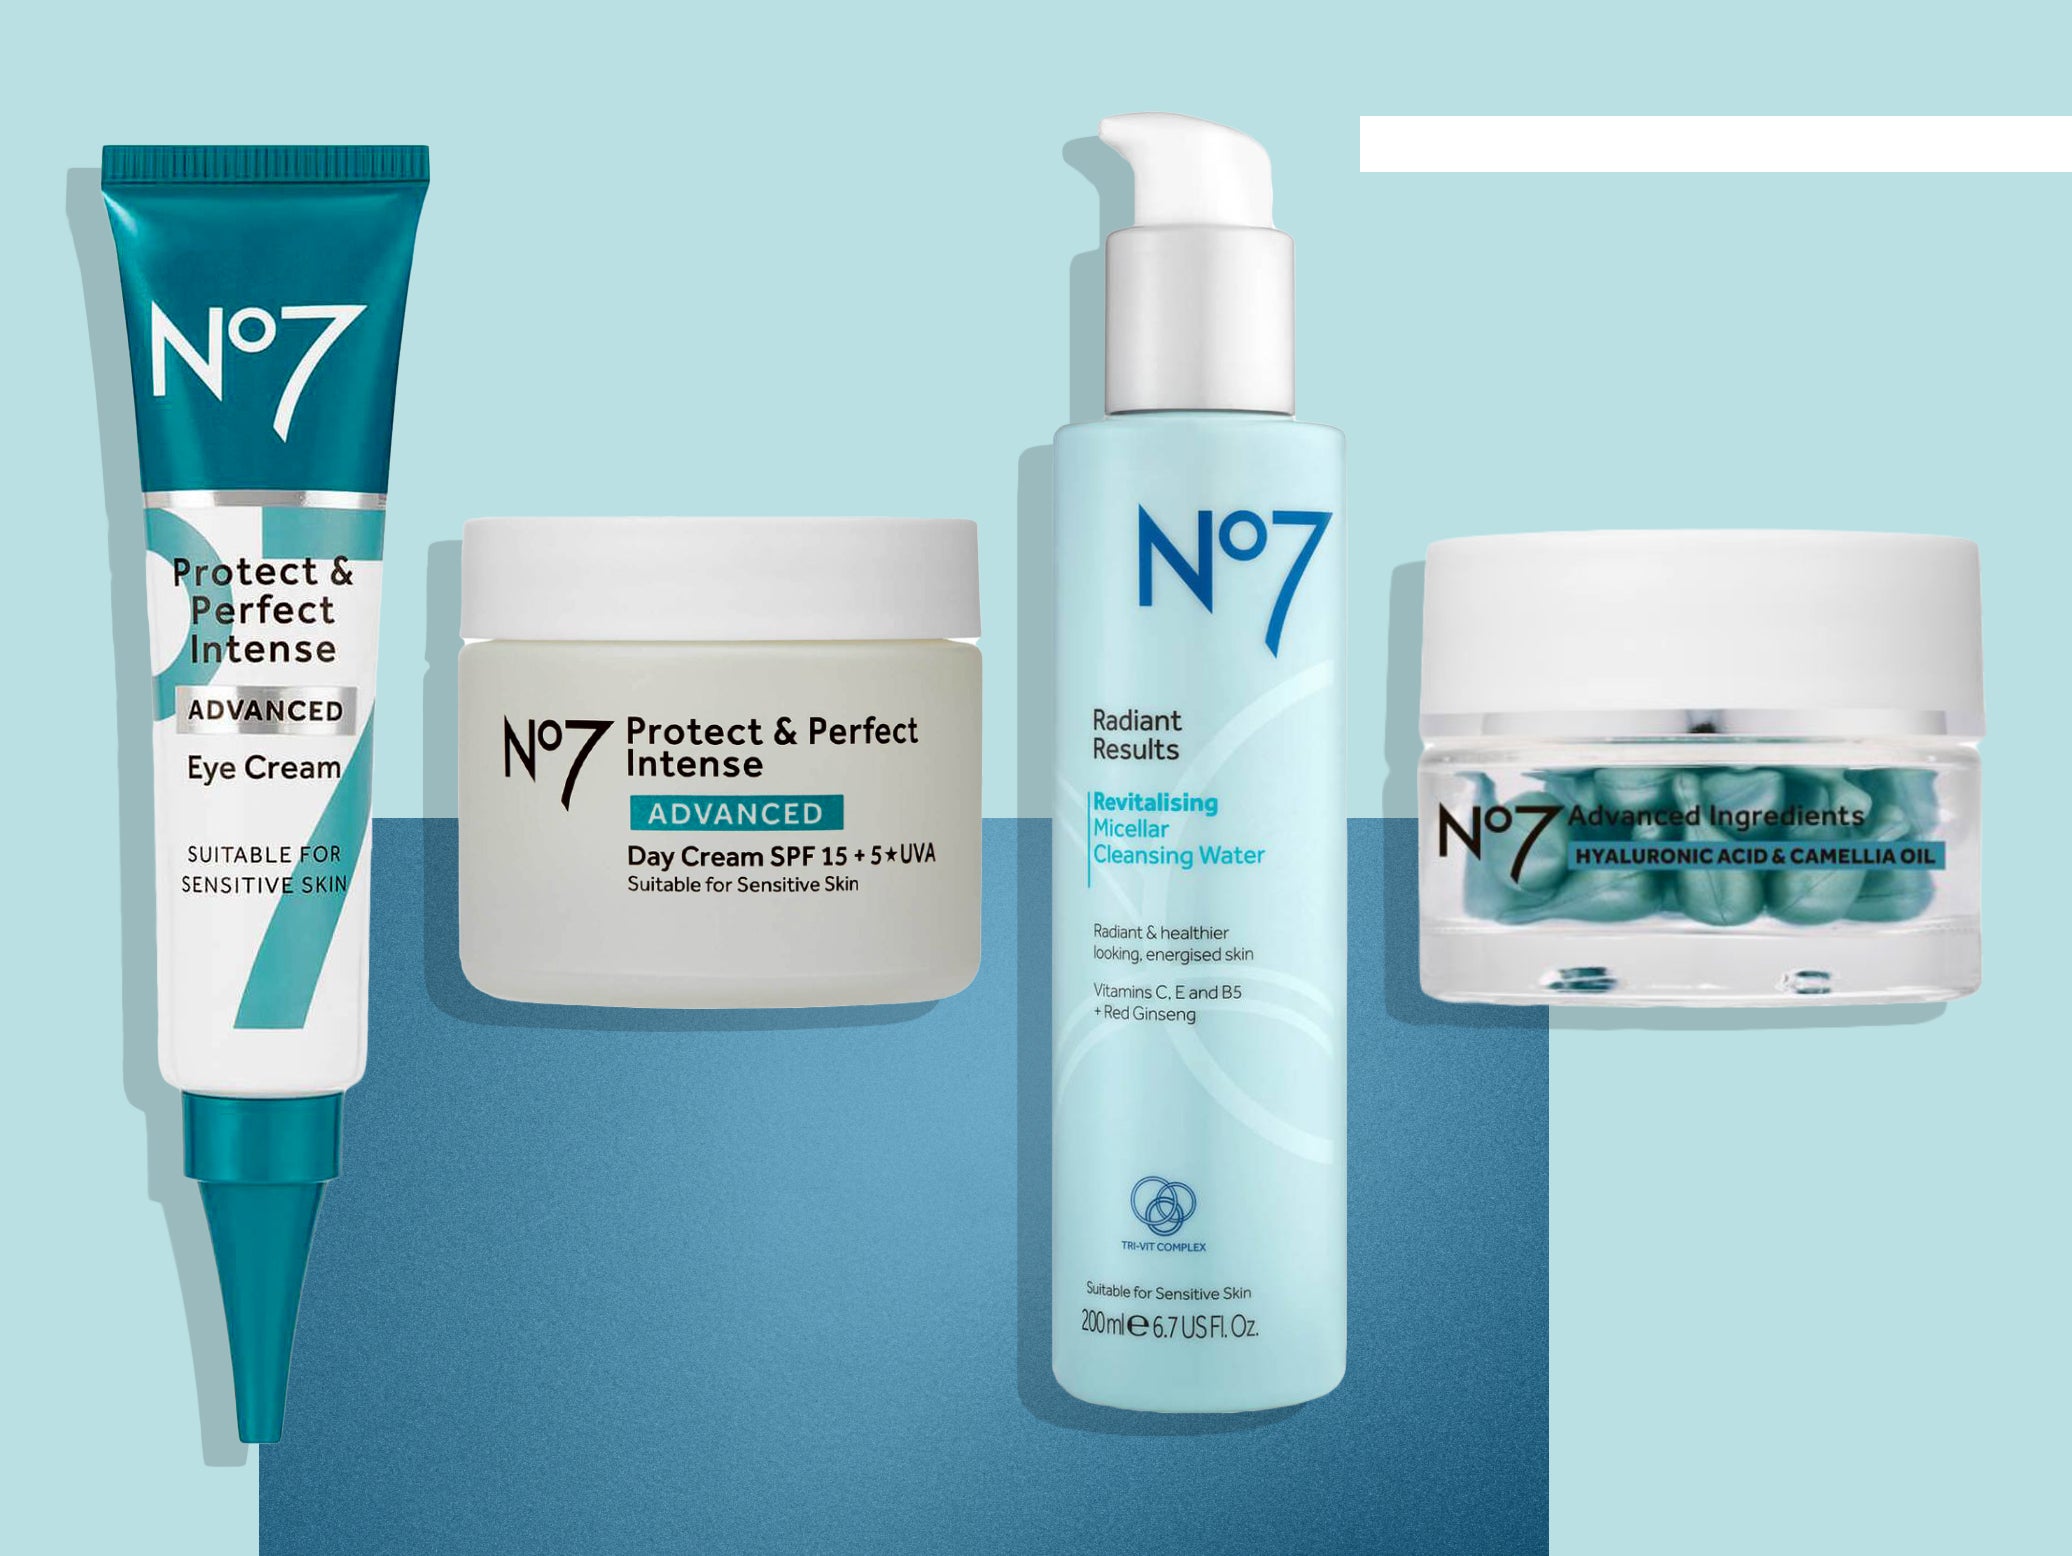 We put the No7 pro derm scan to the test with a whole new skincare routine  | The Independent